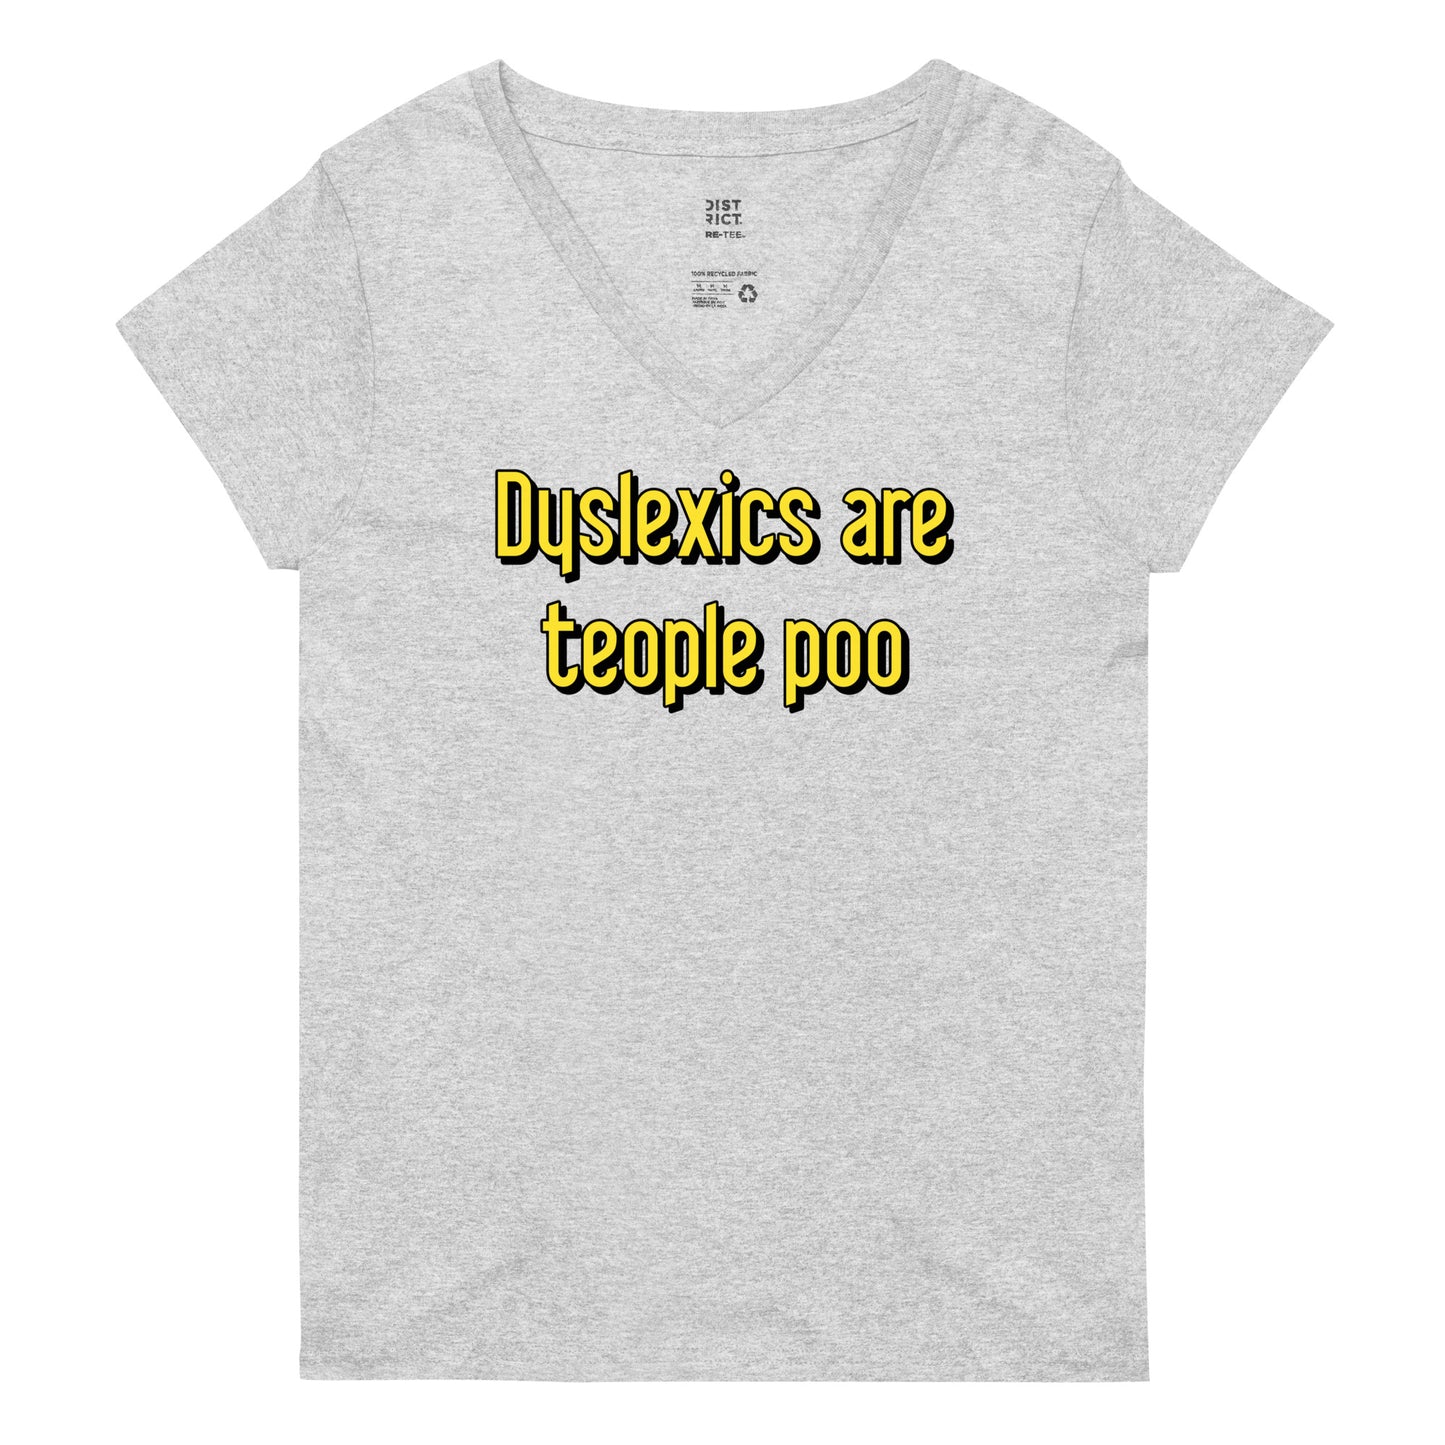 Dyslexics are teople poo Women's V-Neck Tee